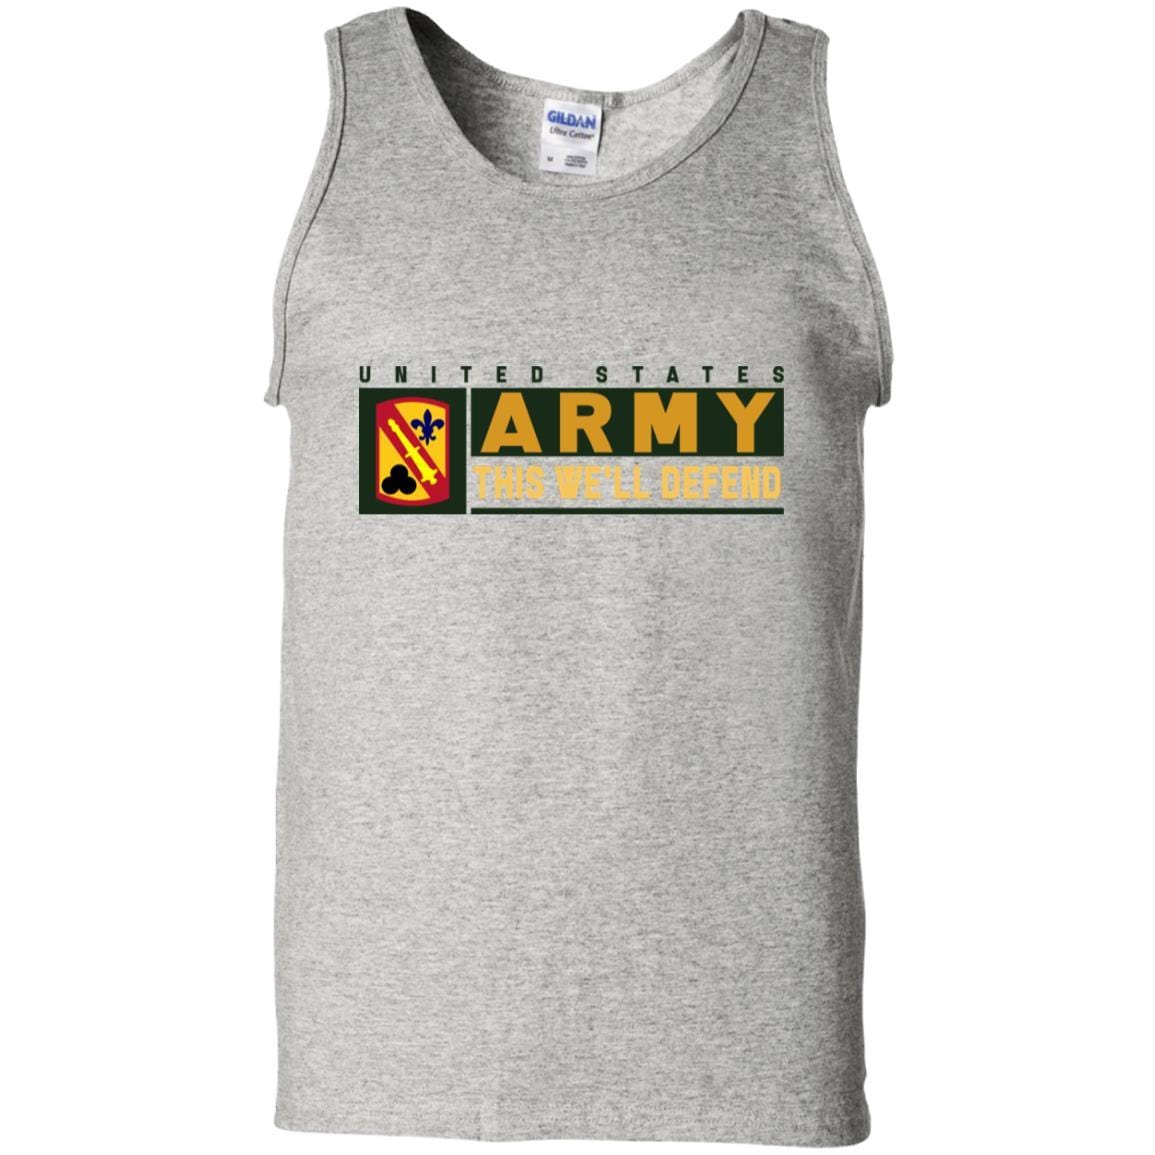 US Army 42 FIELD ARTILLERY BRIGADE- This We'll Defend T-Shirt On Front For Men-TShirt-Army-Veterans Nation